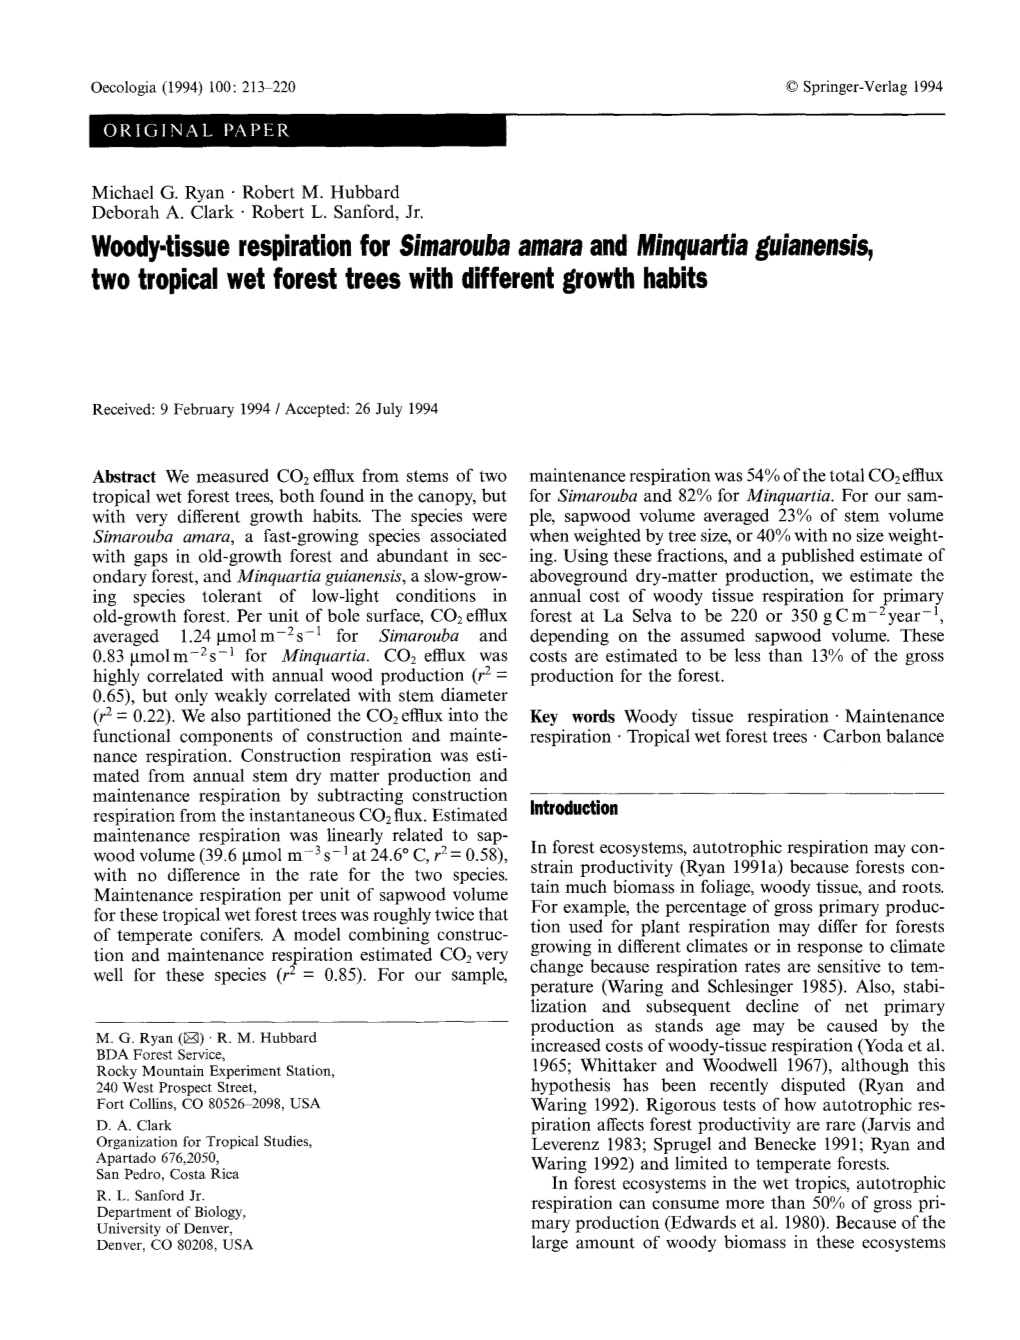 Woody-Tissue Respiration for Simarouba Amara and Minquartia Guianensis, Two Tropical Wet Forest Trees with Different Growth Habits